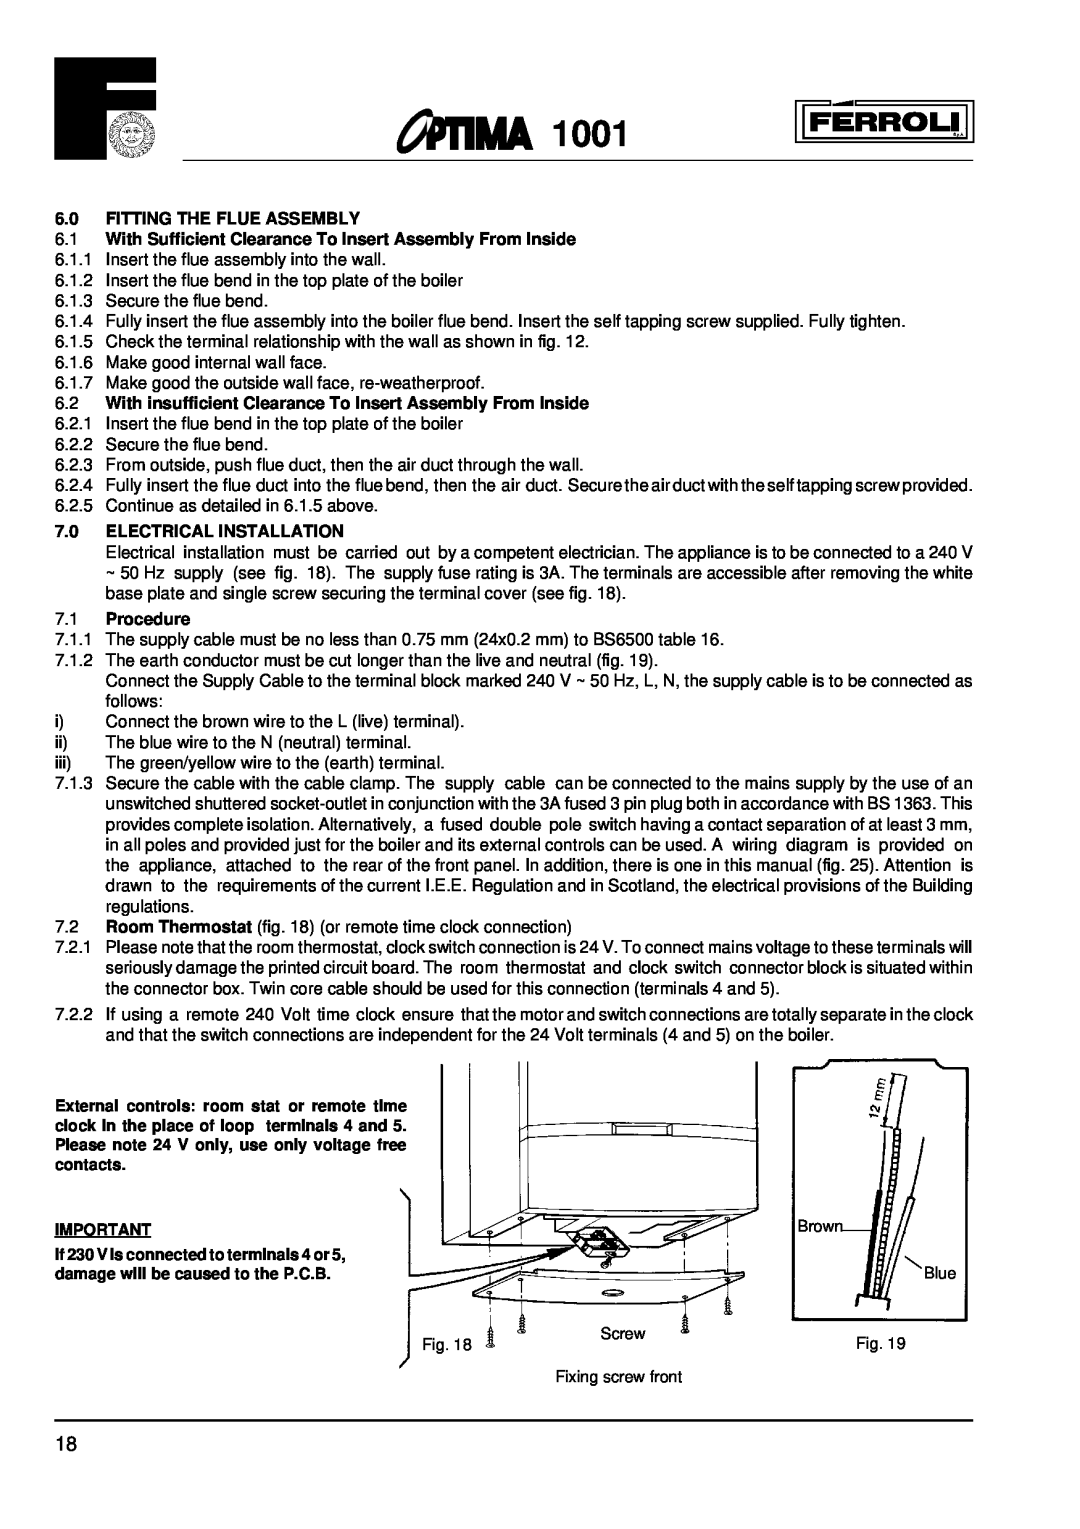 Optima Company 1001 installation instructions 6.0FITTING THE FLUE ASSEMBLY, 7.0ELECTRICAL INSTALLATION, 7.1Procedure 